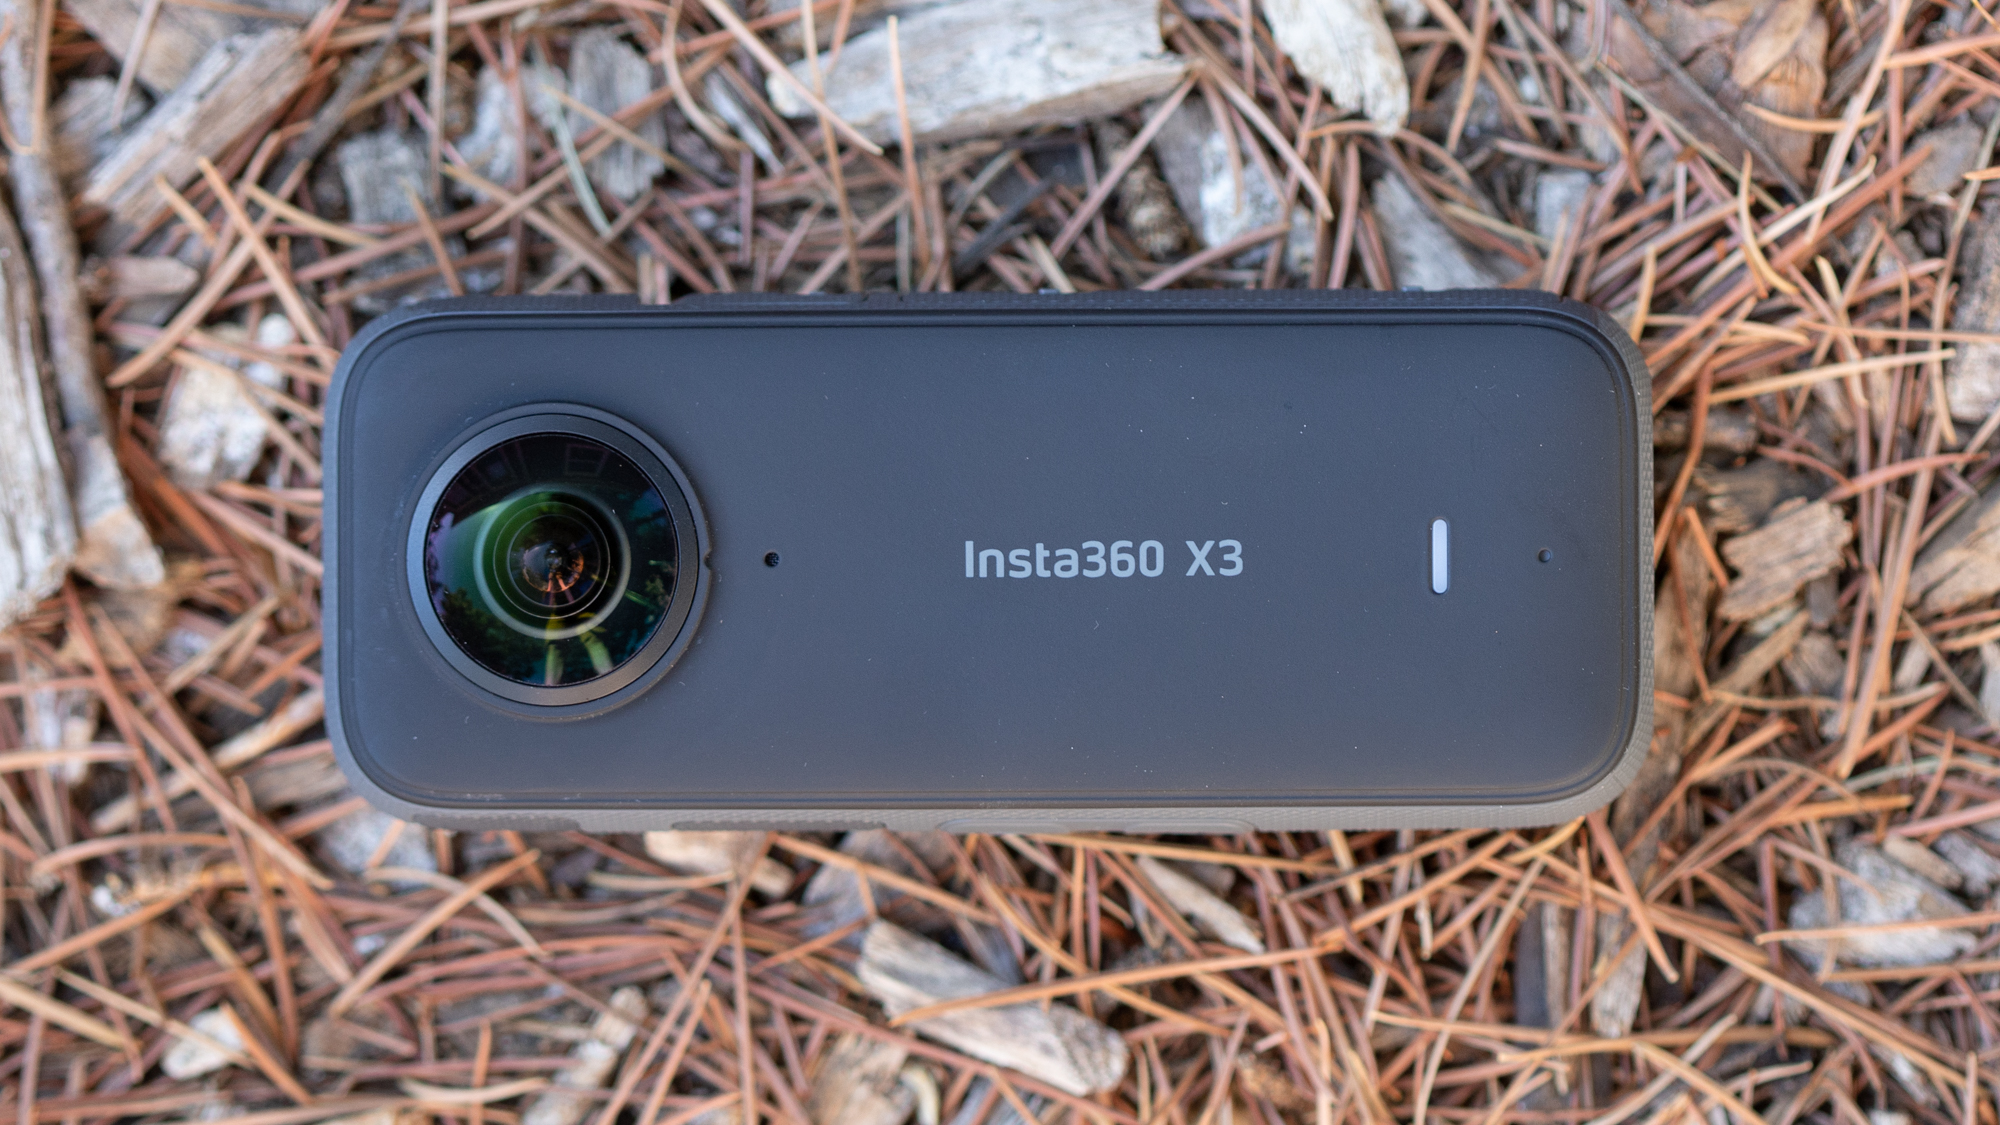 Insta360 X3 action camera review: Better than a GoPro for general